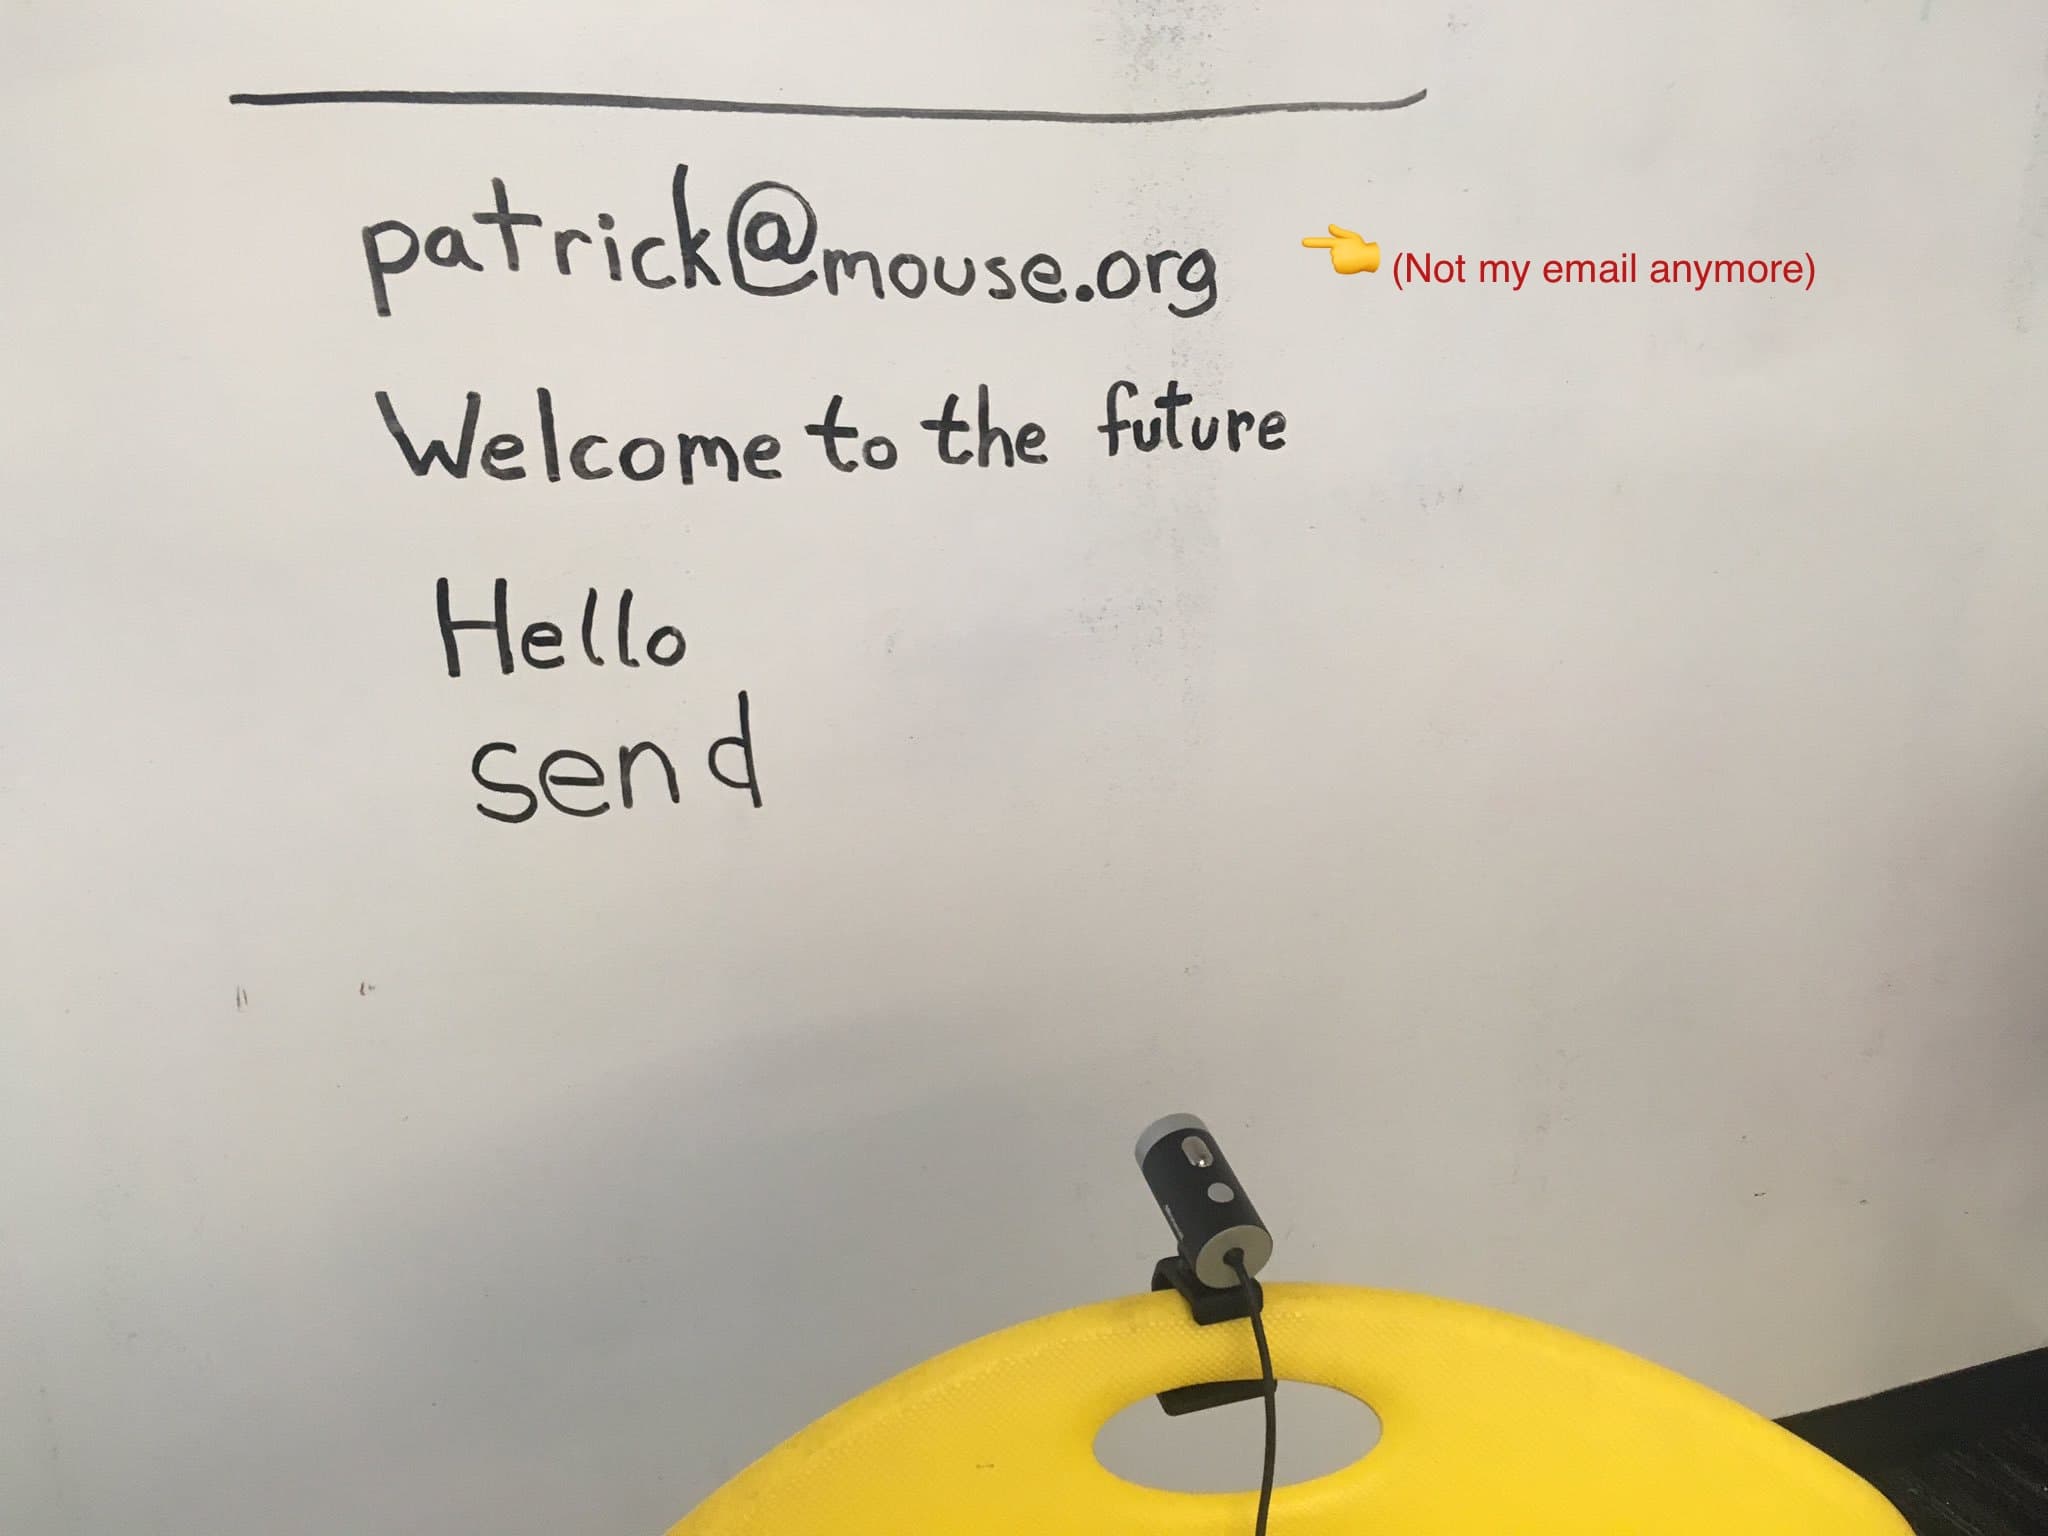 A photograph of email text written on a white board.